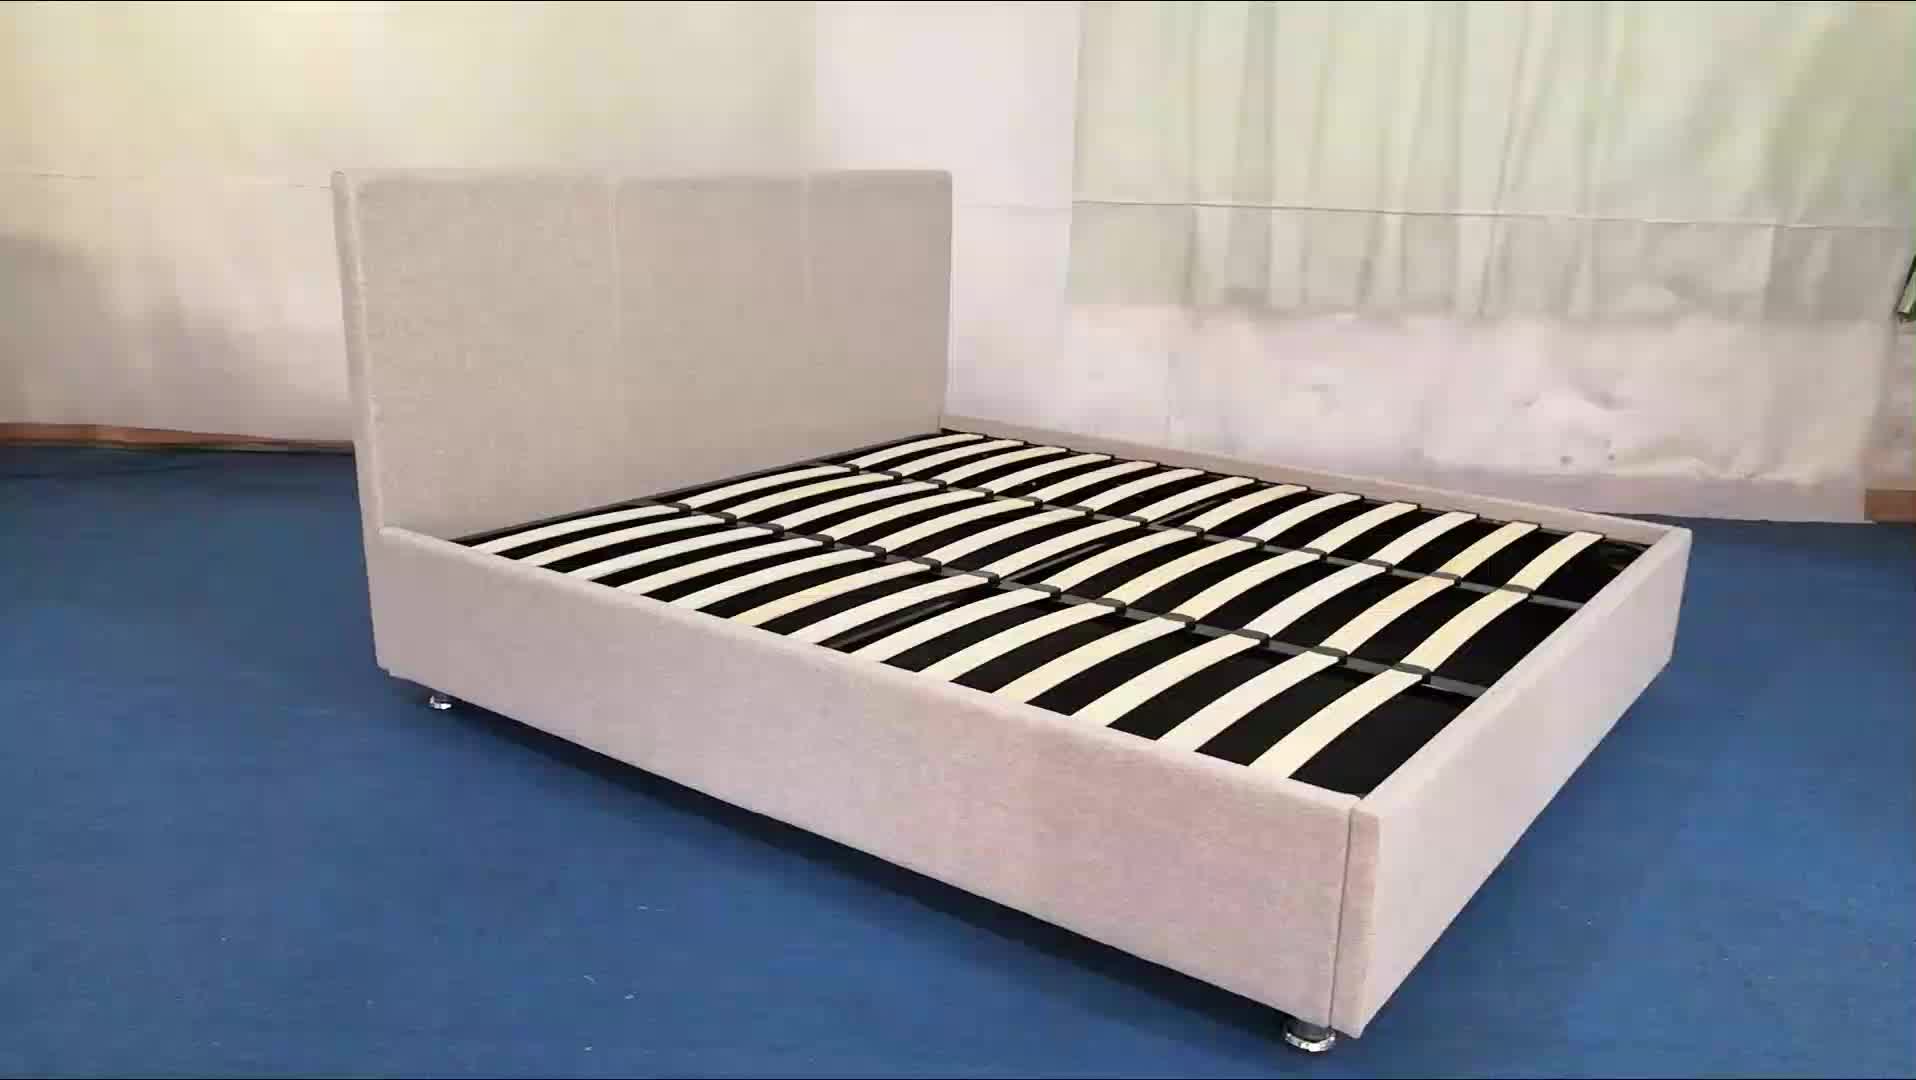 Gas lift bed assembly instructions